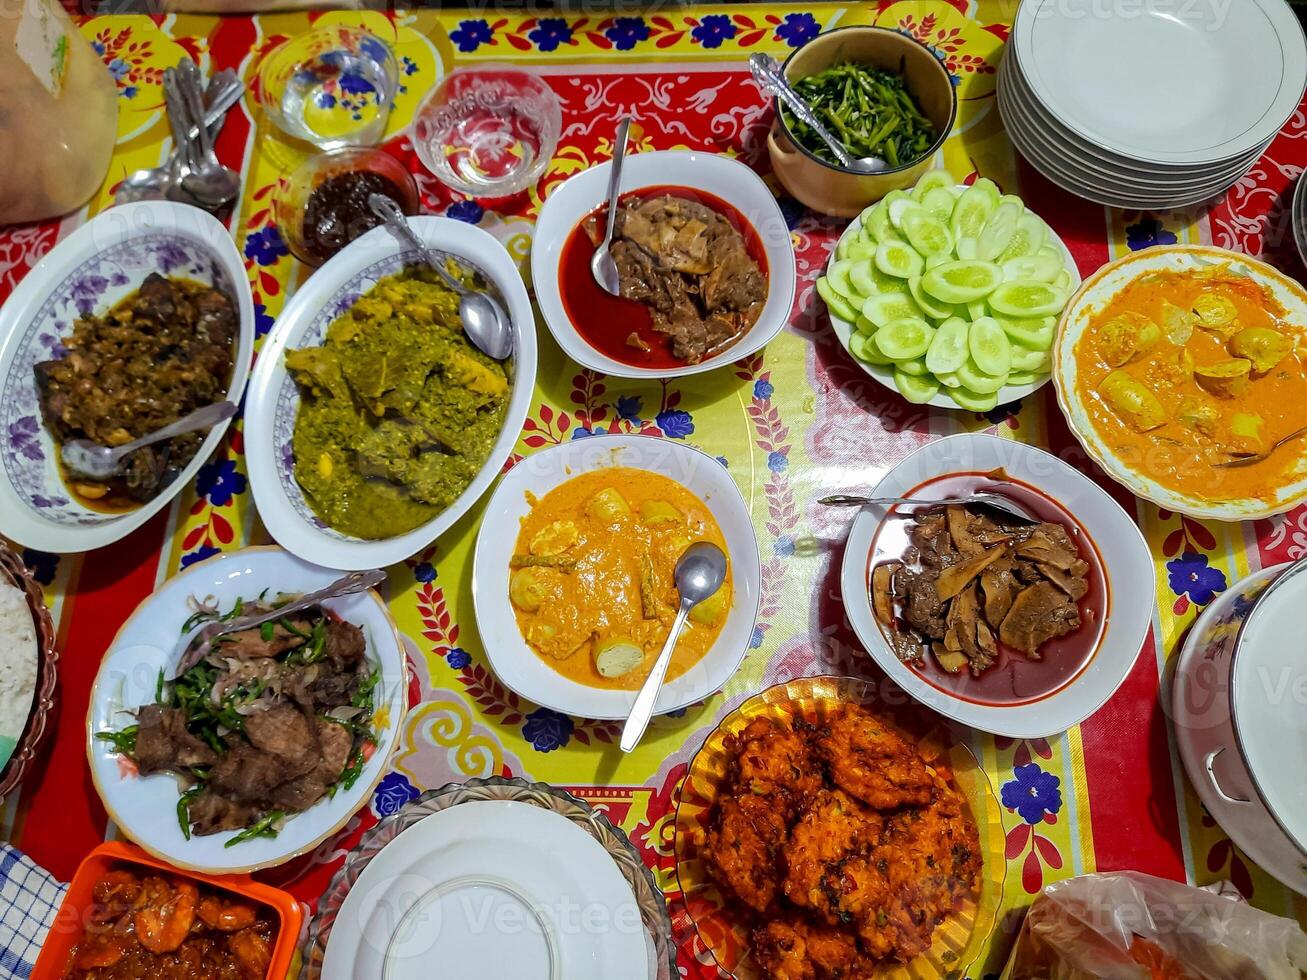 Ramadan fast breaking meal with Padang cuisine as a typical food in Indonesia photo